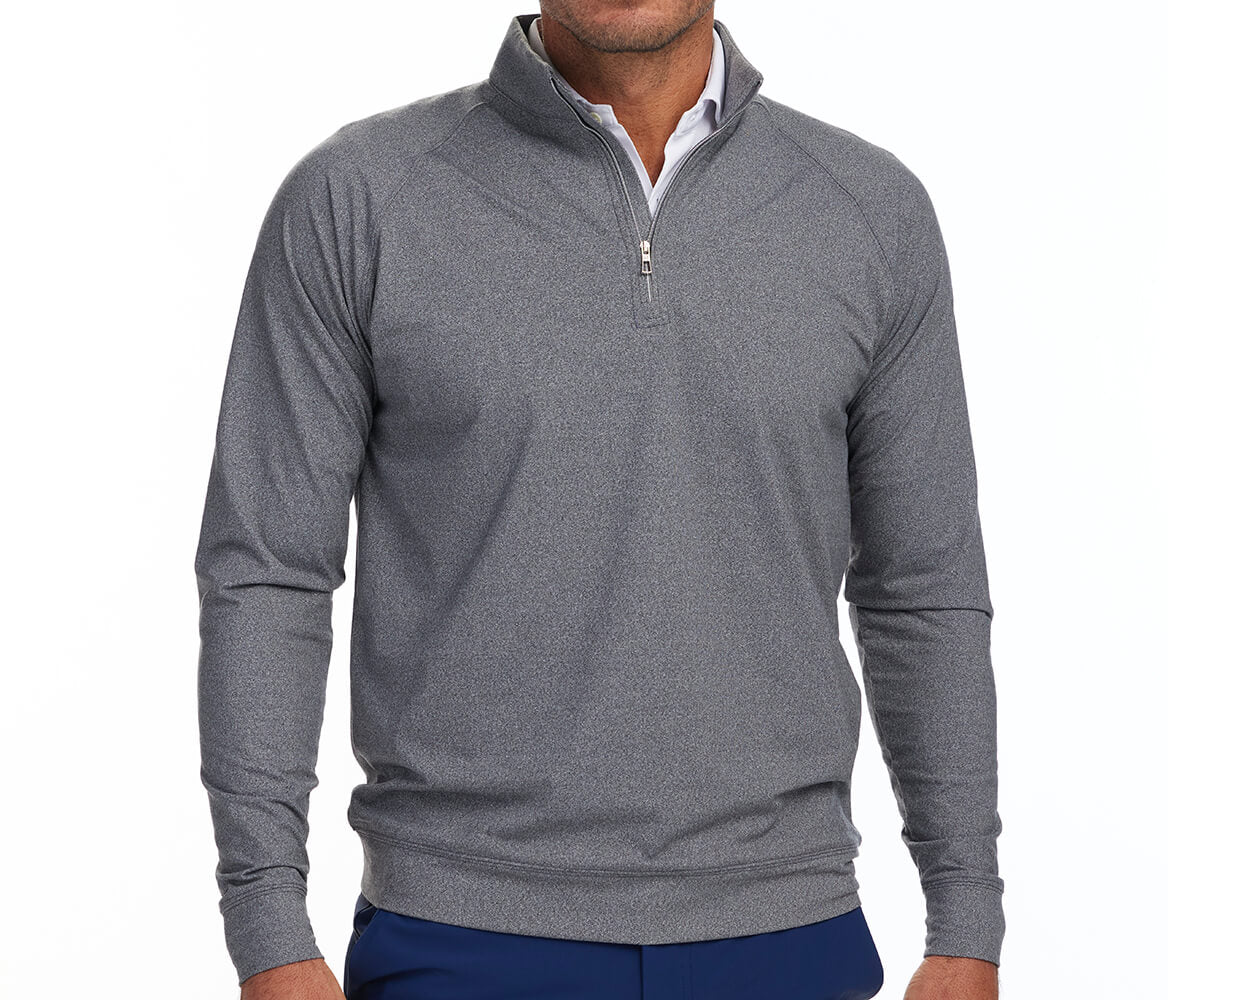 Holderness & Bourne The Westland Pullover - Charcoal